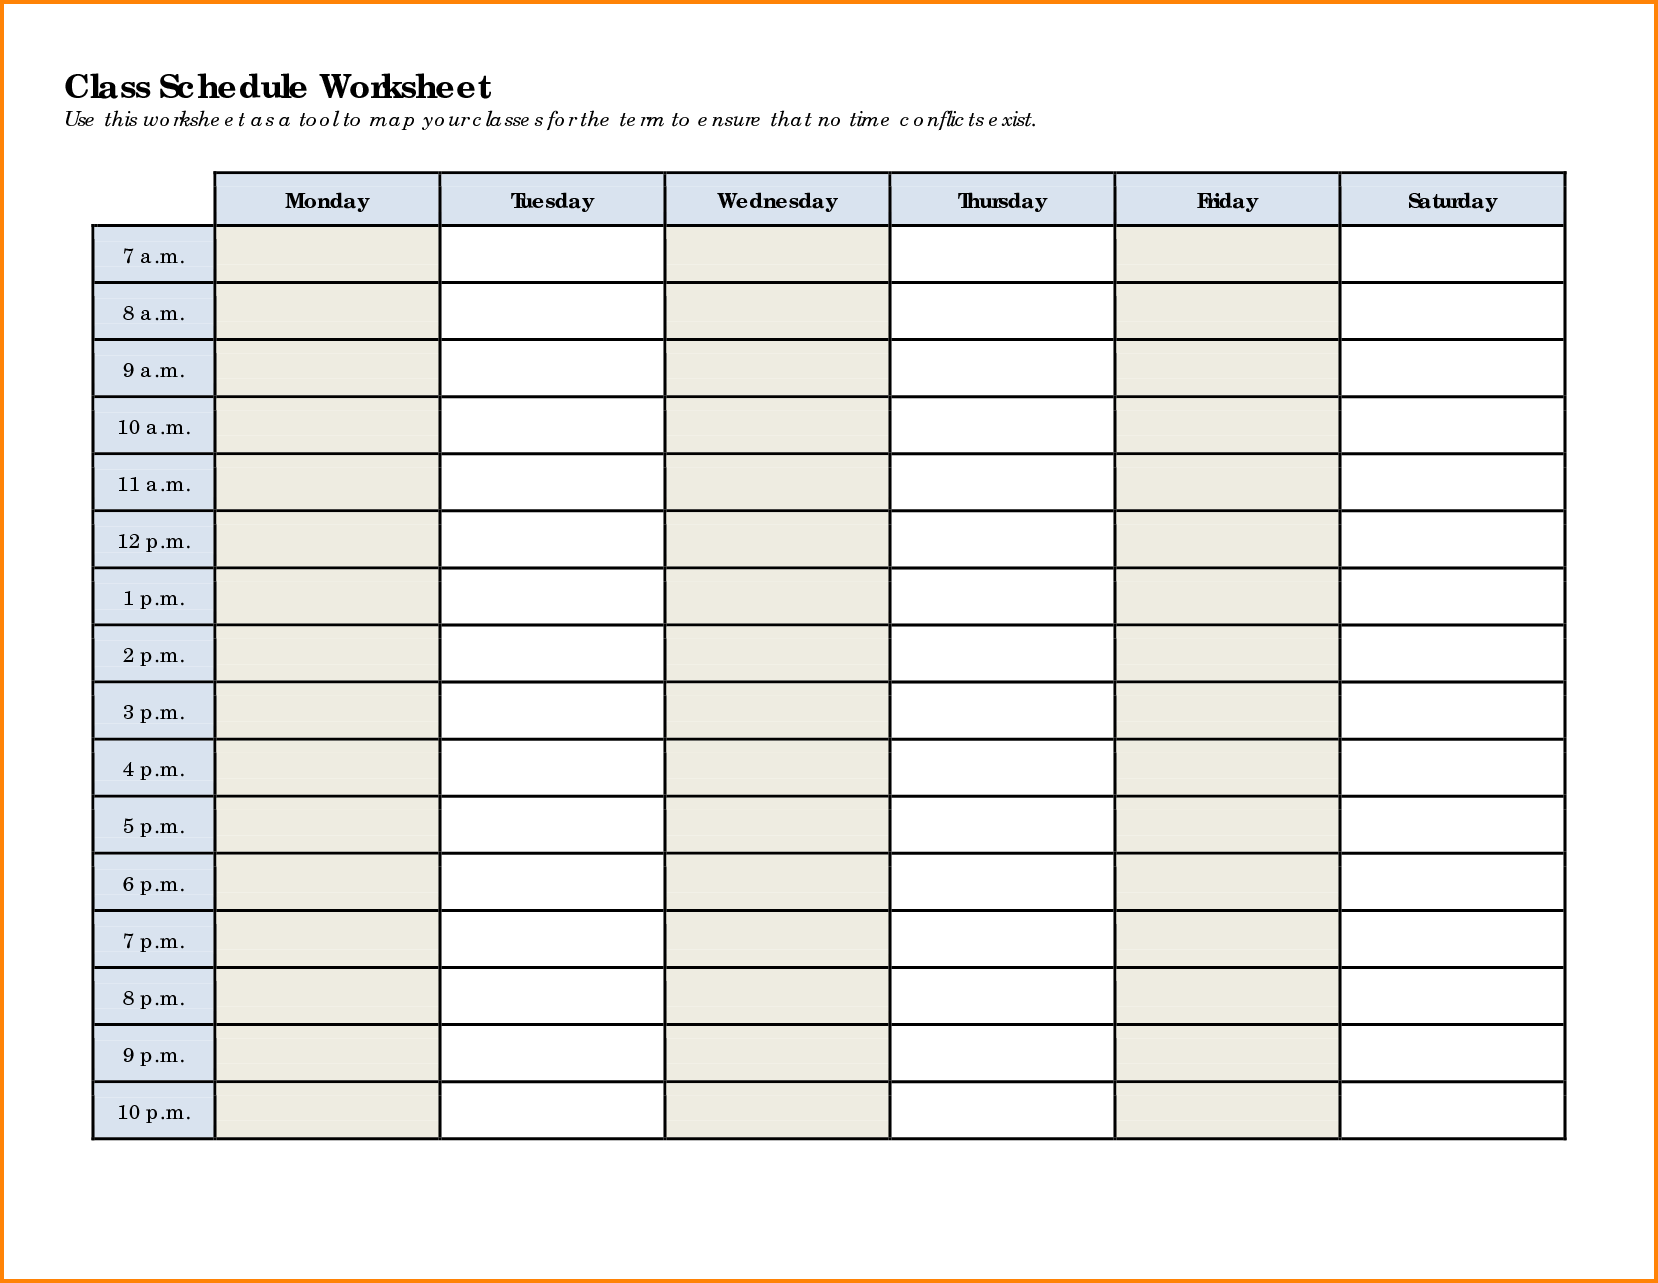 26 Create Hourly Class Schedule Template For Ms Word By Hourly Class Schedule Template Cards